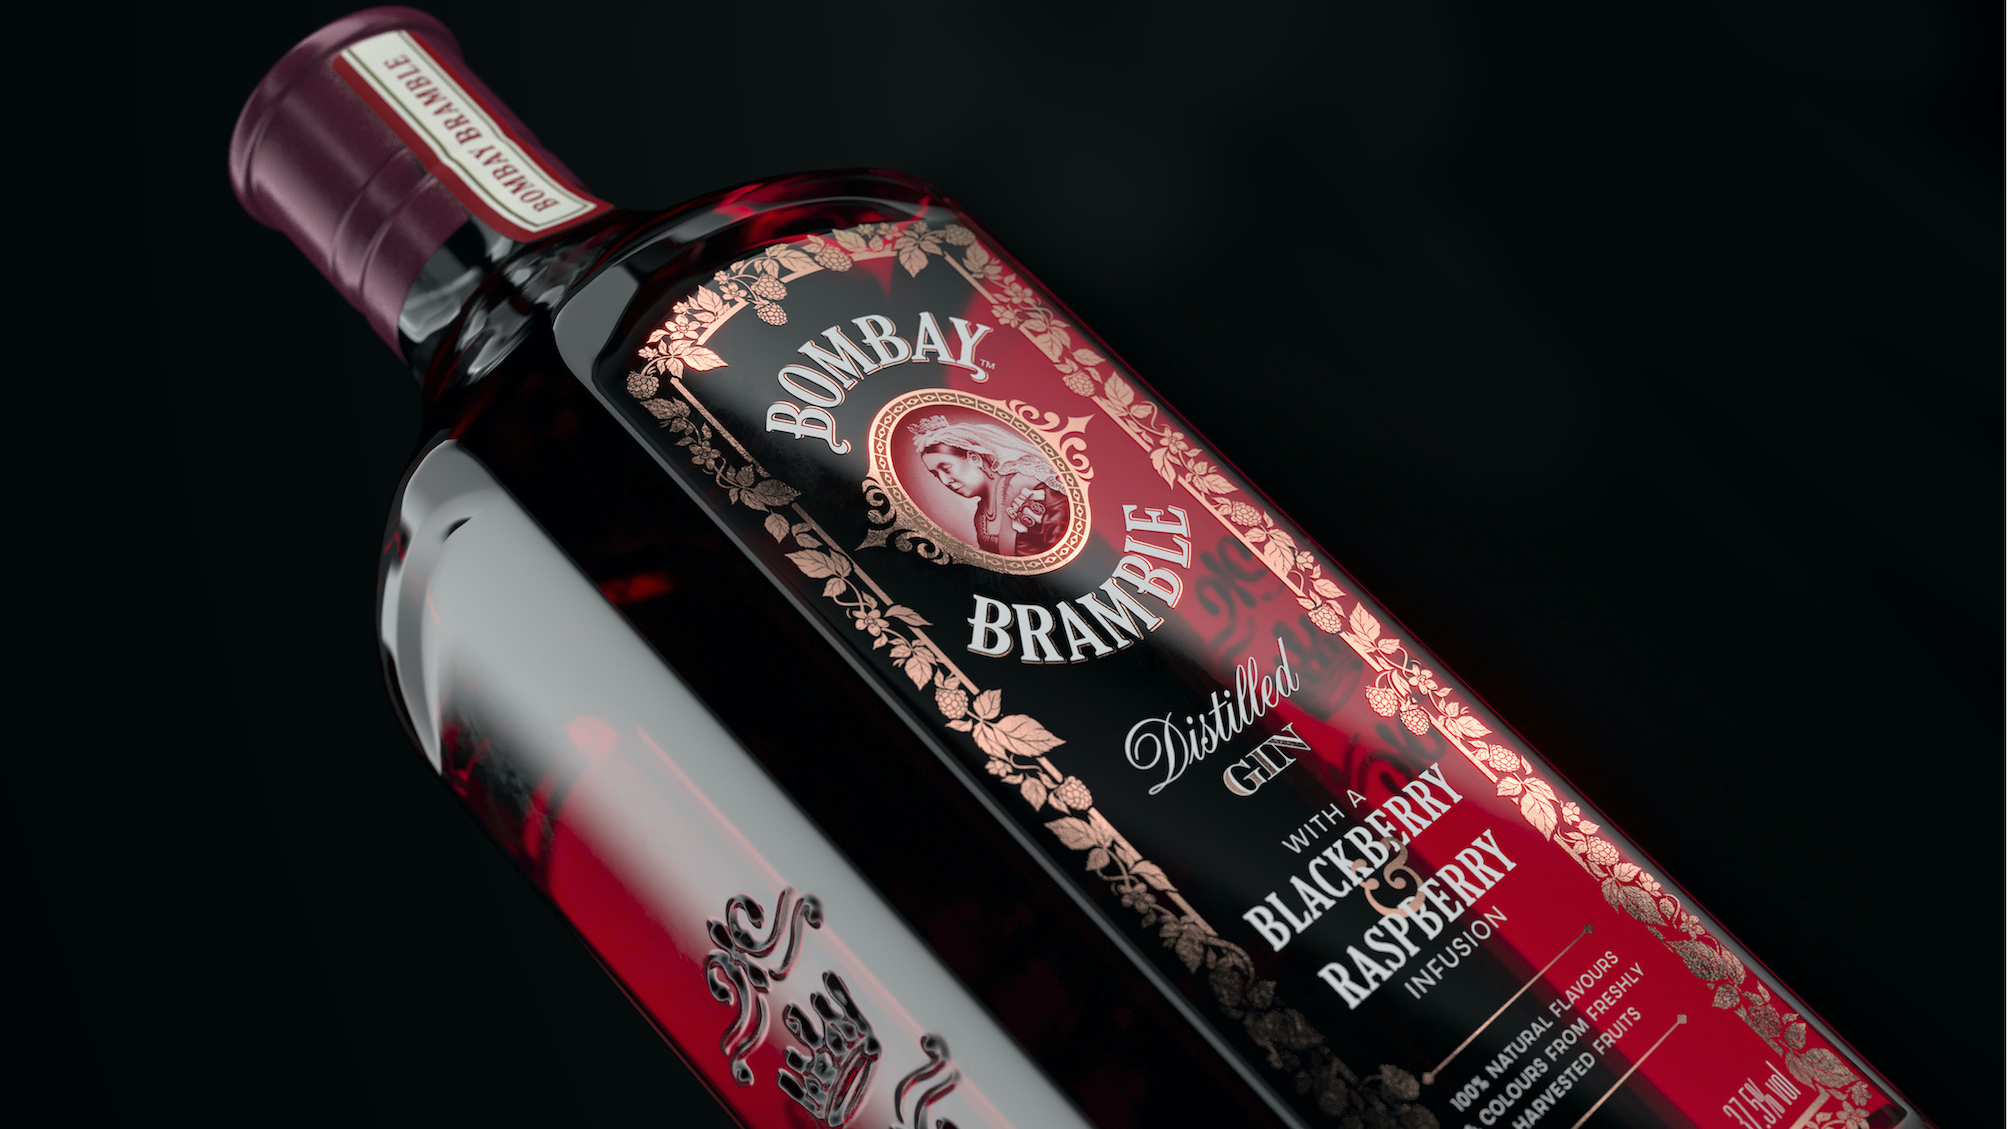 Knockout Designs Bombay Bramble, a Creative New Expression of Gin